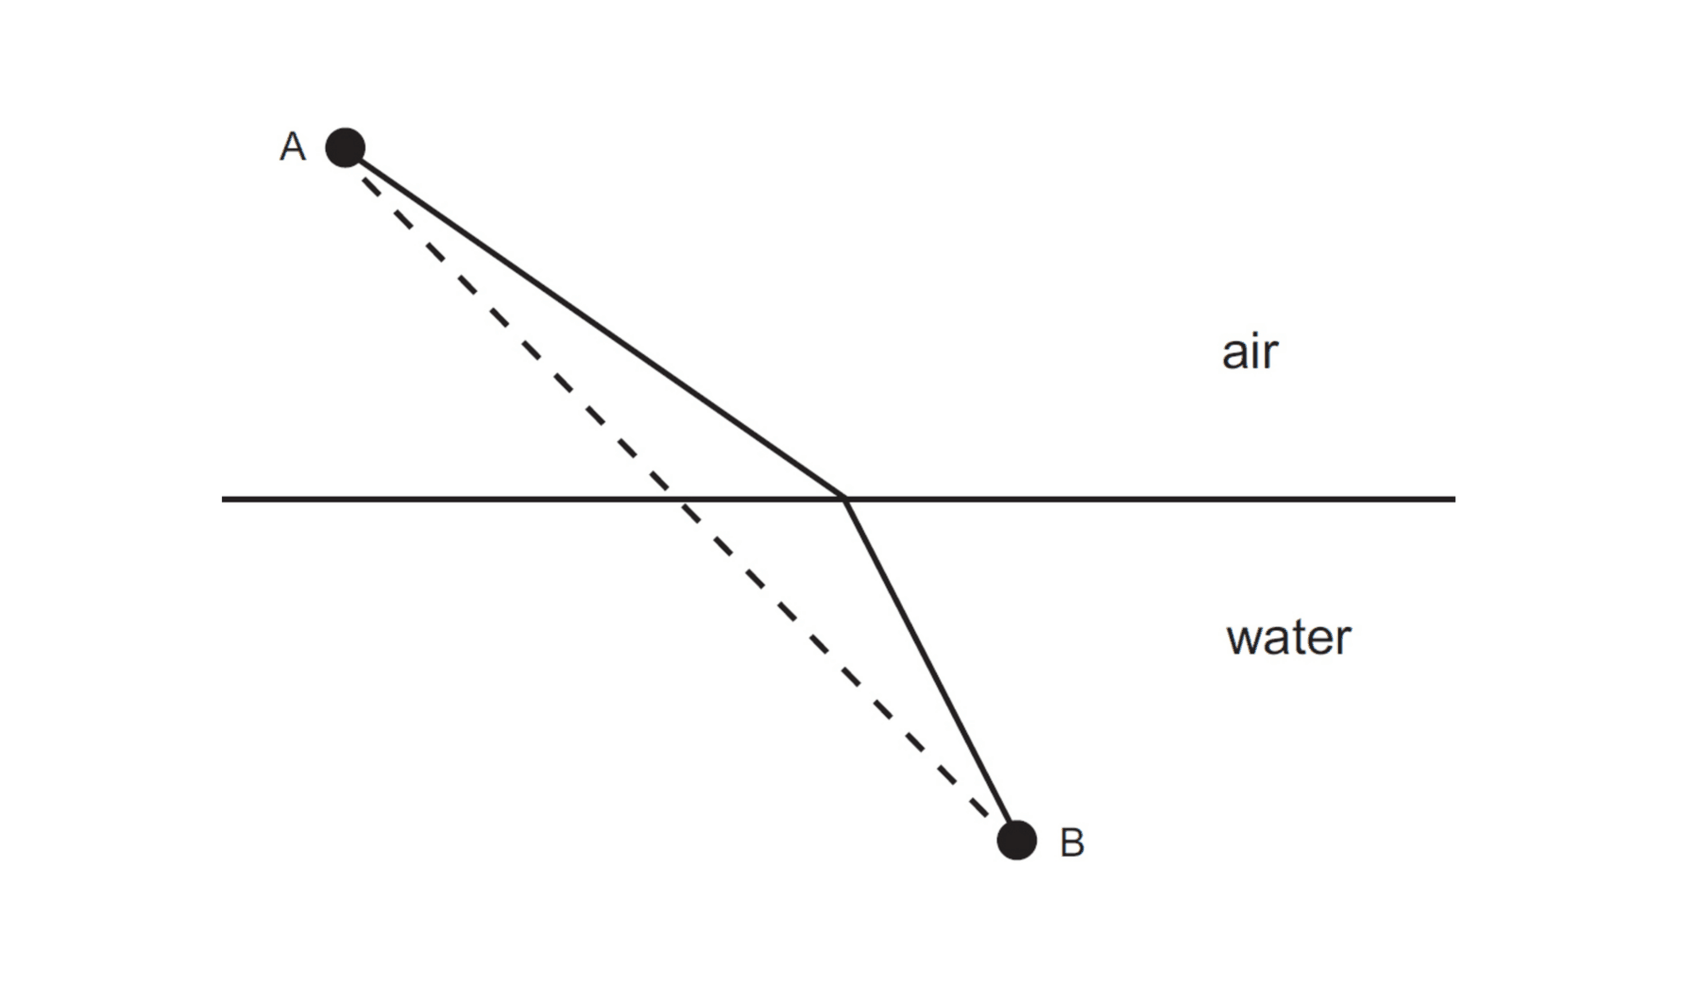 [Physics diagram: a ray of light refracting in air/water, comparing its actual time-efficient path to the hypothetical shortest-distance (but slower) alternative path.]